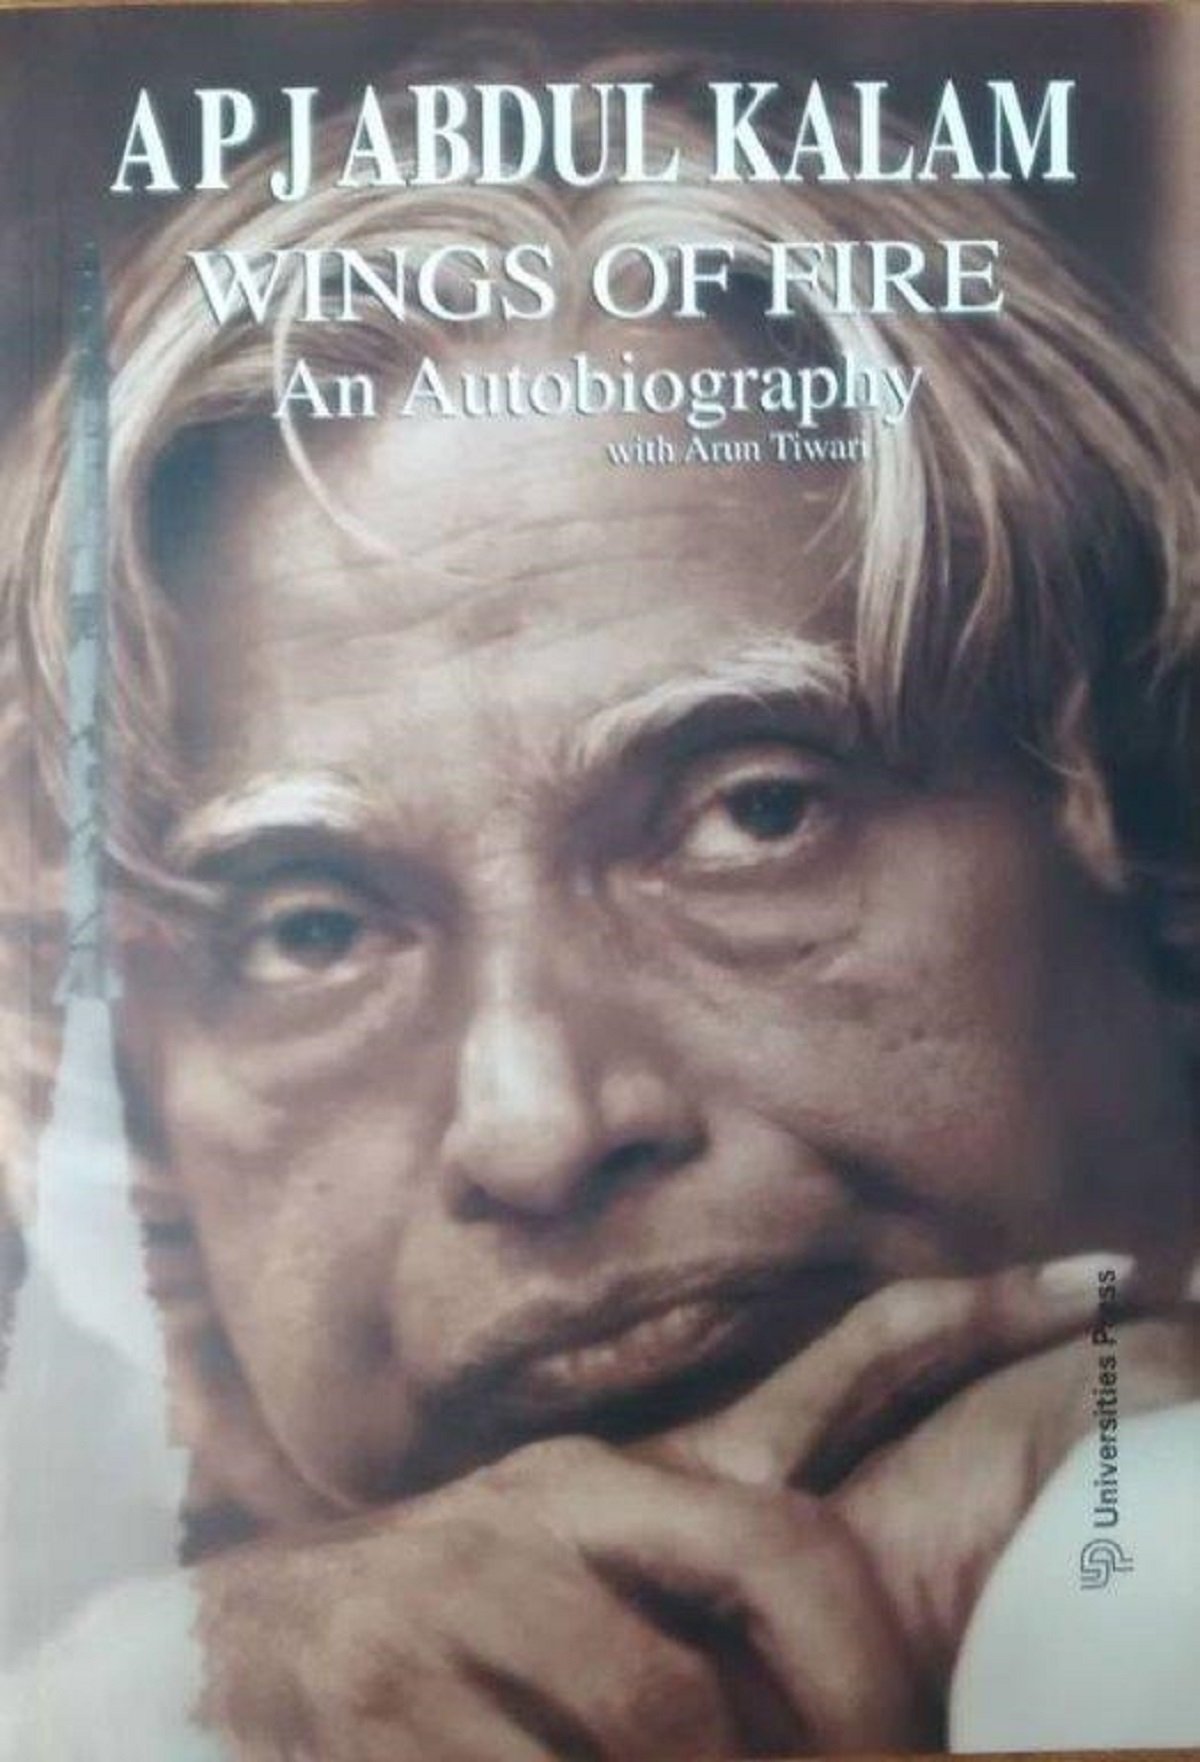 [PDF] Download WINGS OF FIRE: AUTOBIOGRAPHY OF ABDUL KALAM Book pdf